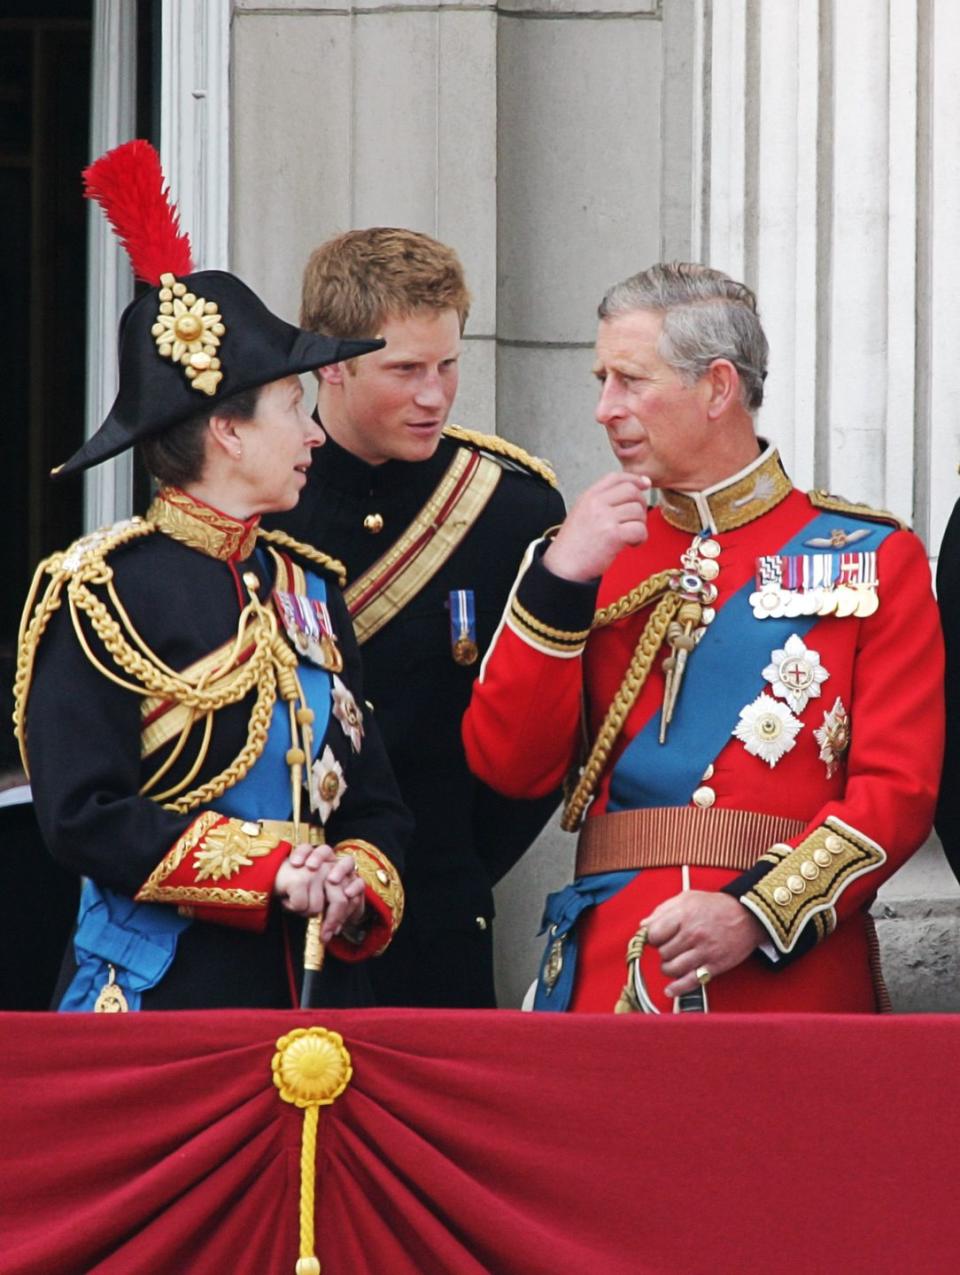 The Queen's Birthday Parade & Trooping The Colour